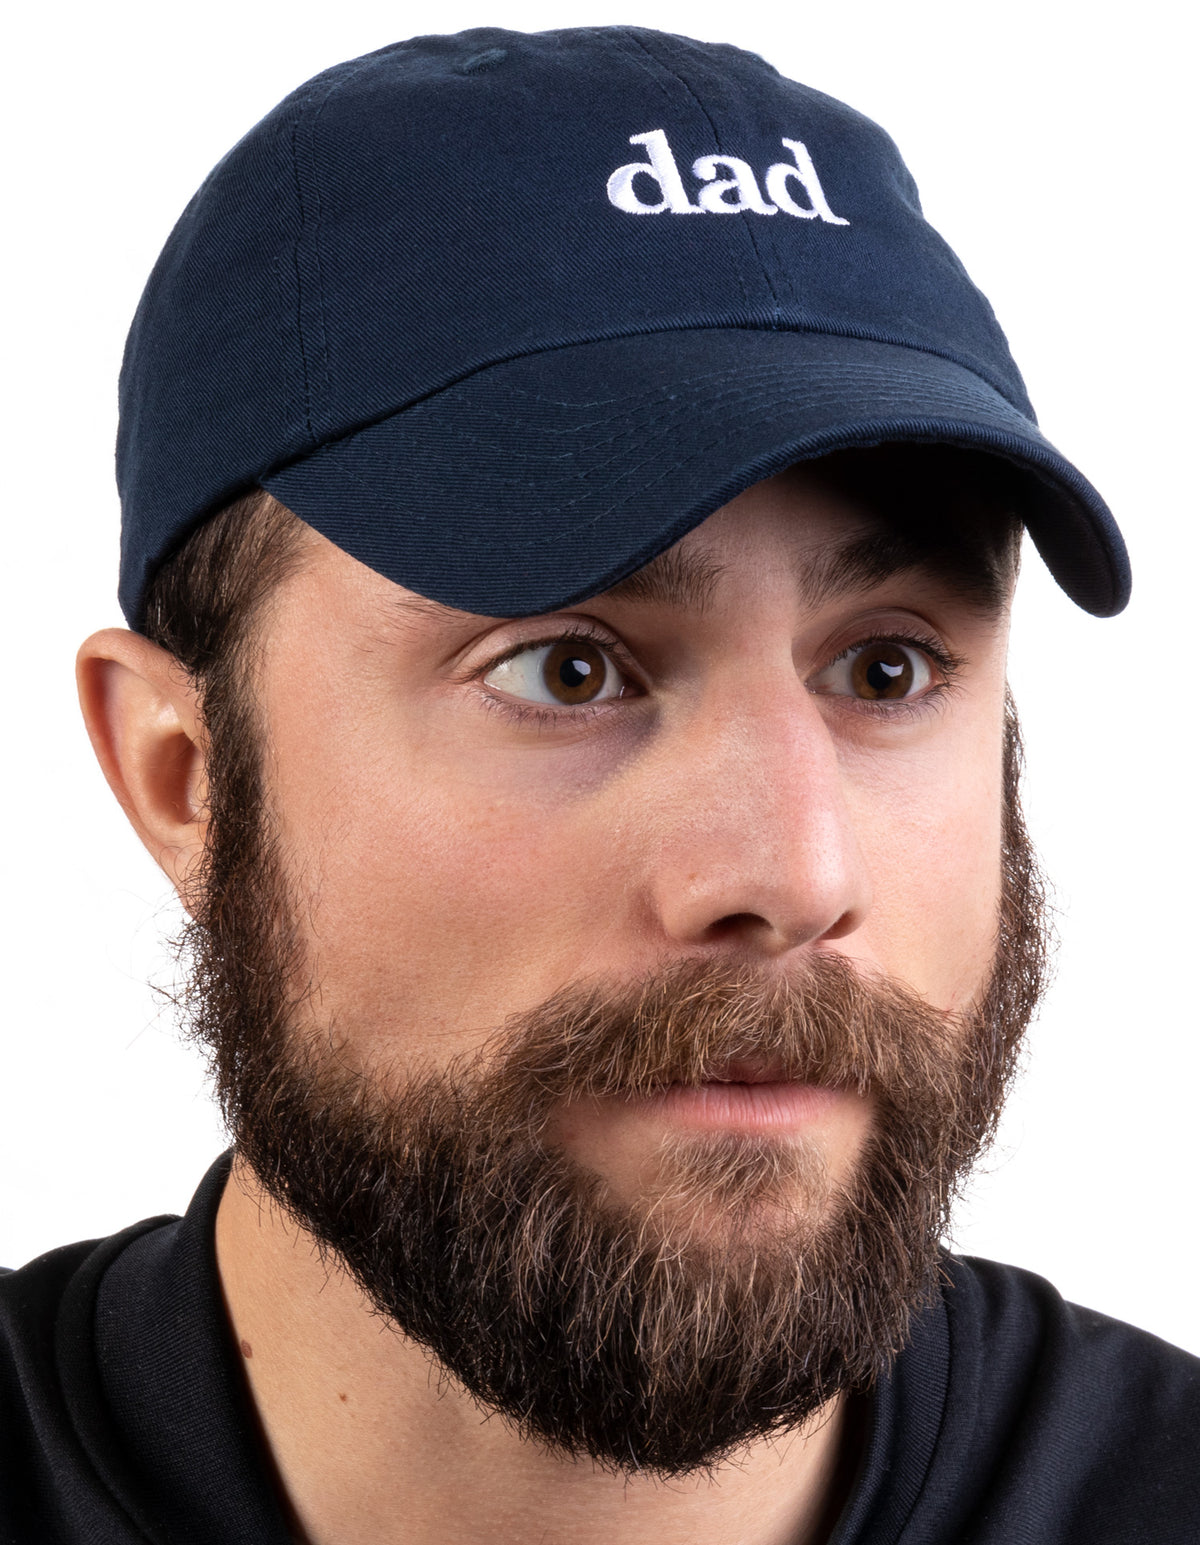 Dad Hat | Funny Embroidered Baseball Cap Gift for Men Daddy Husband Father Joke